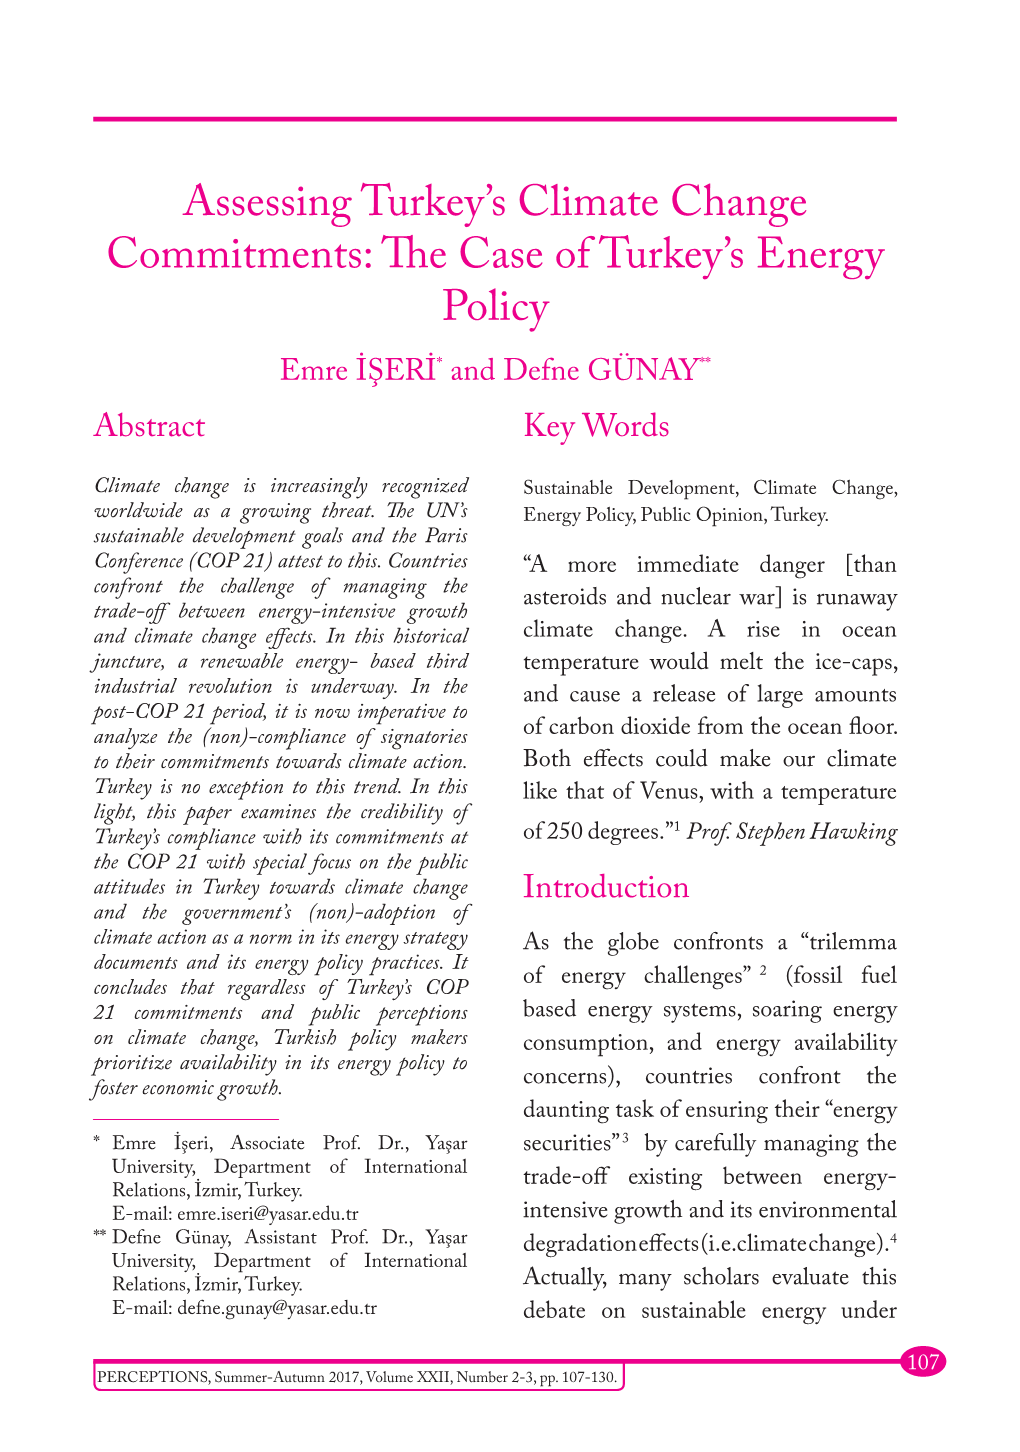 Assessing Turkey's Climate Change Commitments: the Case of Turkey's Energy Policy